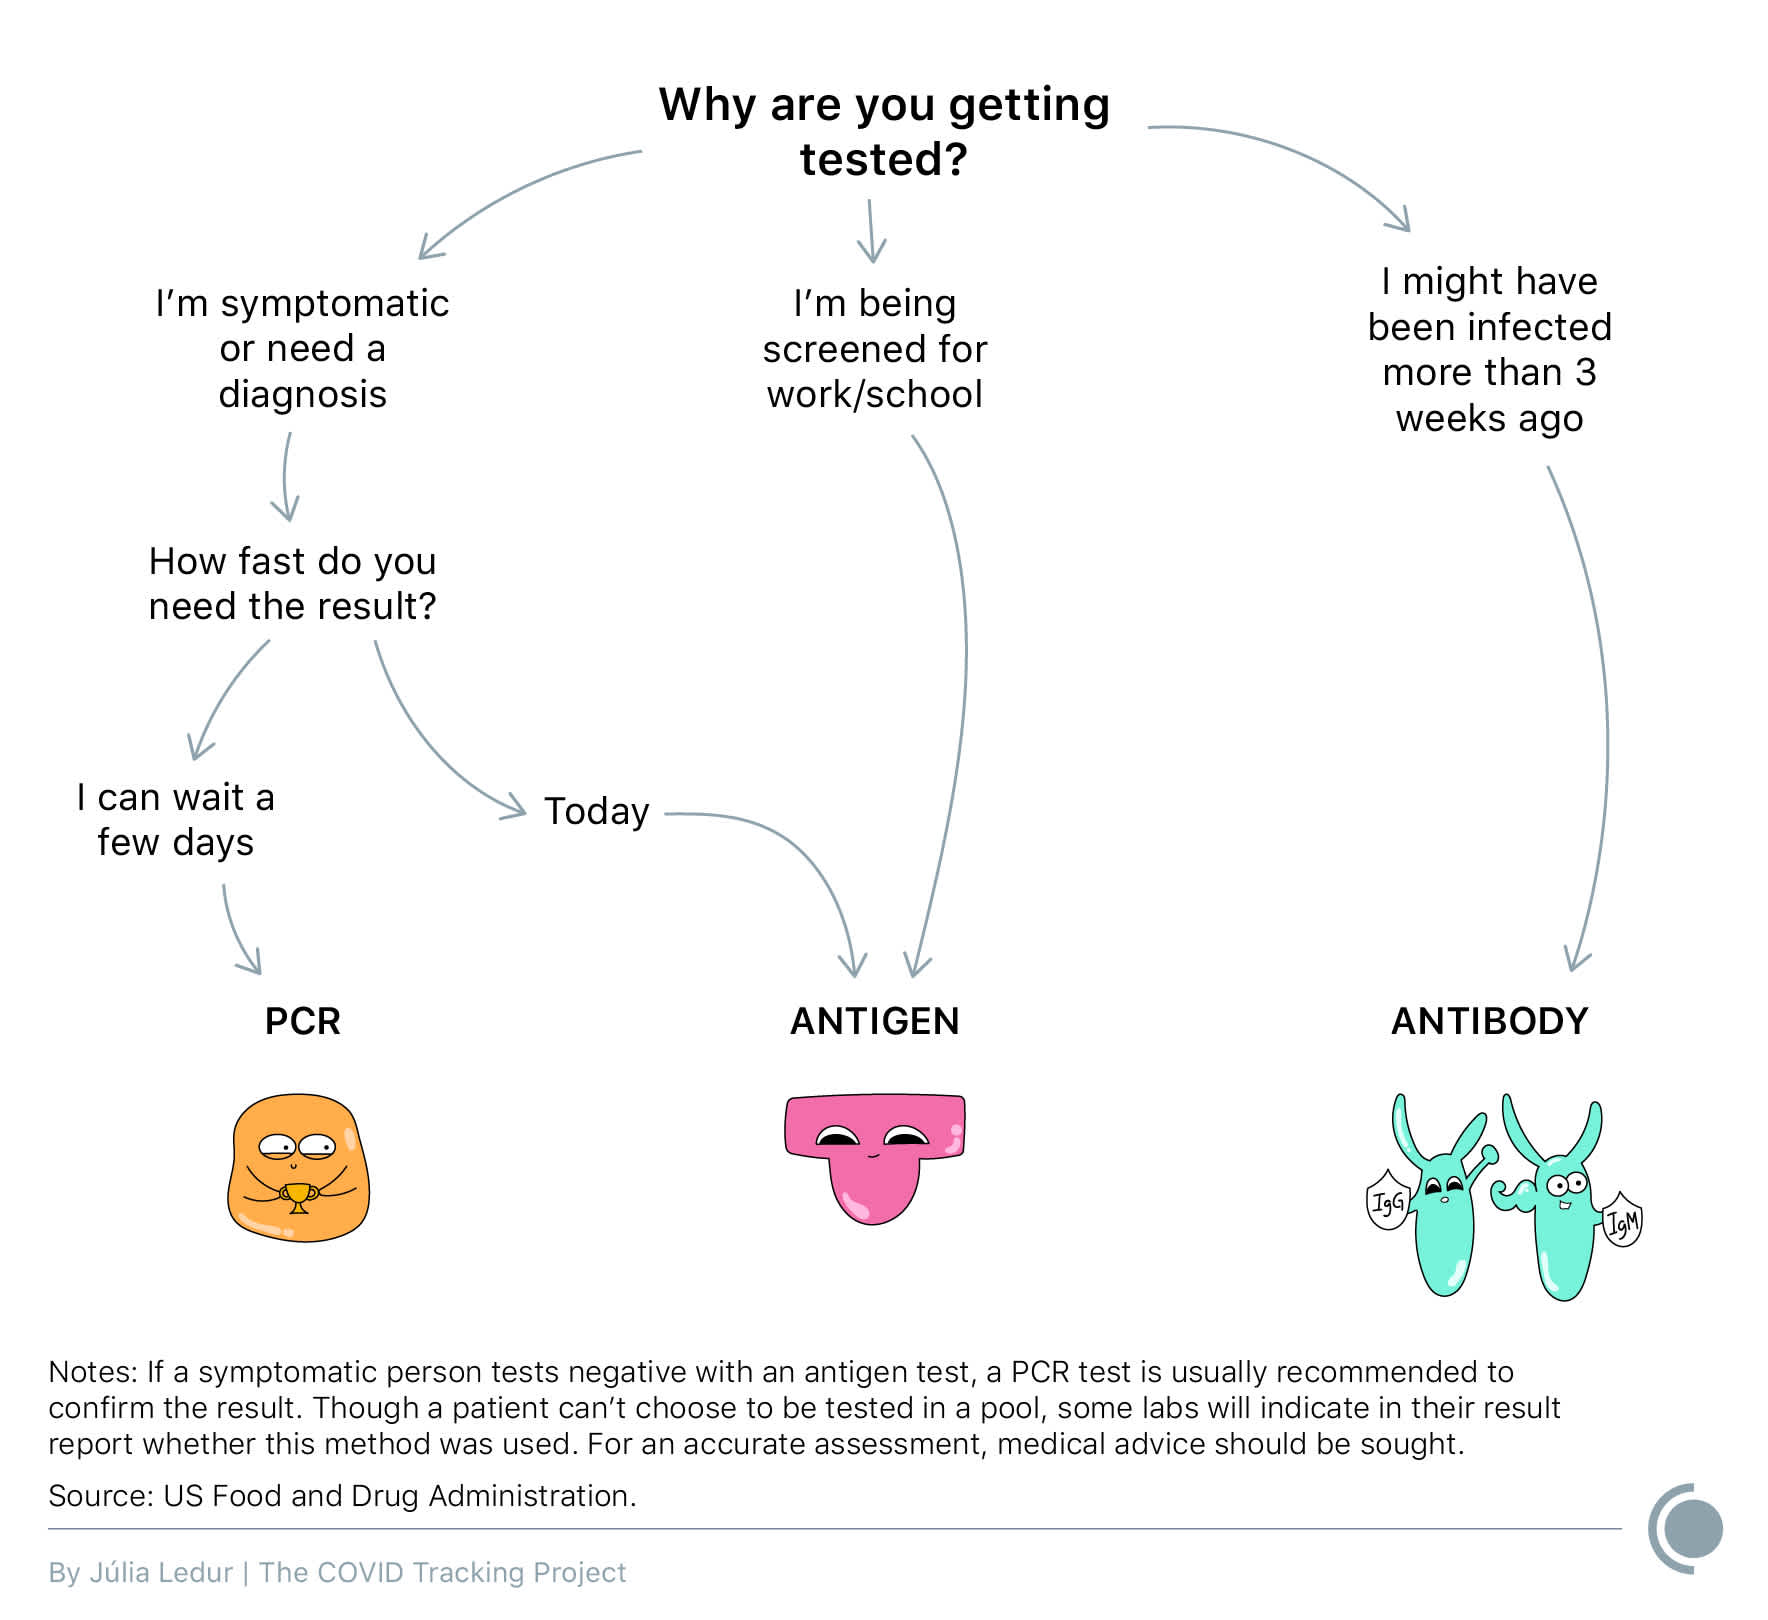 Flow chart shows which test you should get based on a few questions. Why are you getting tested? Option 1: I'm symptomatic or need a diagnosis. How fast do you need the result? a) I can wait a few days. Result: PCR. b) Today. Result antigen. Option 2: I'm being screened for work/school. Result: antigen. Option 3: I might have been infected more than 3 weeks ago. Result: antibody. Notes: If a symptomatic person tests negative with an antigen test, a PCR test is usually recommended to confirm the result. Though a patient can’t choose to be tested in a pool, some labs will indicate in their result report whether this method was used. For an accurate assessment, medical advice should be sought.